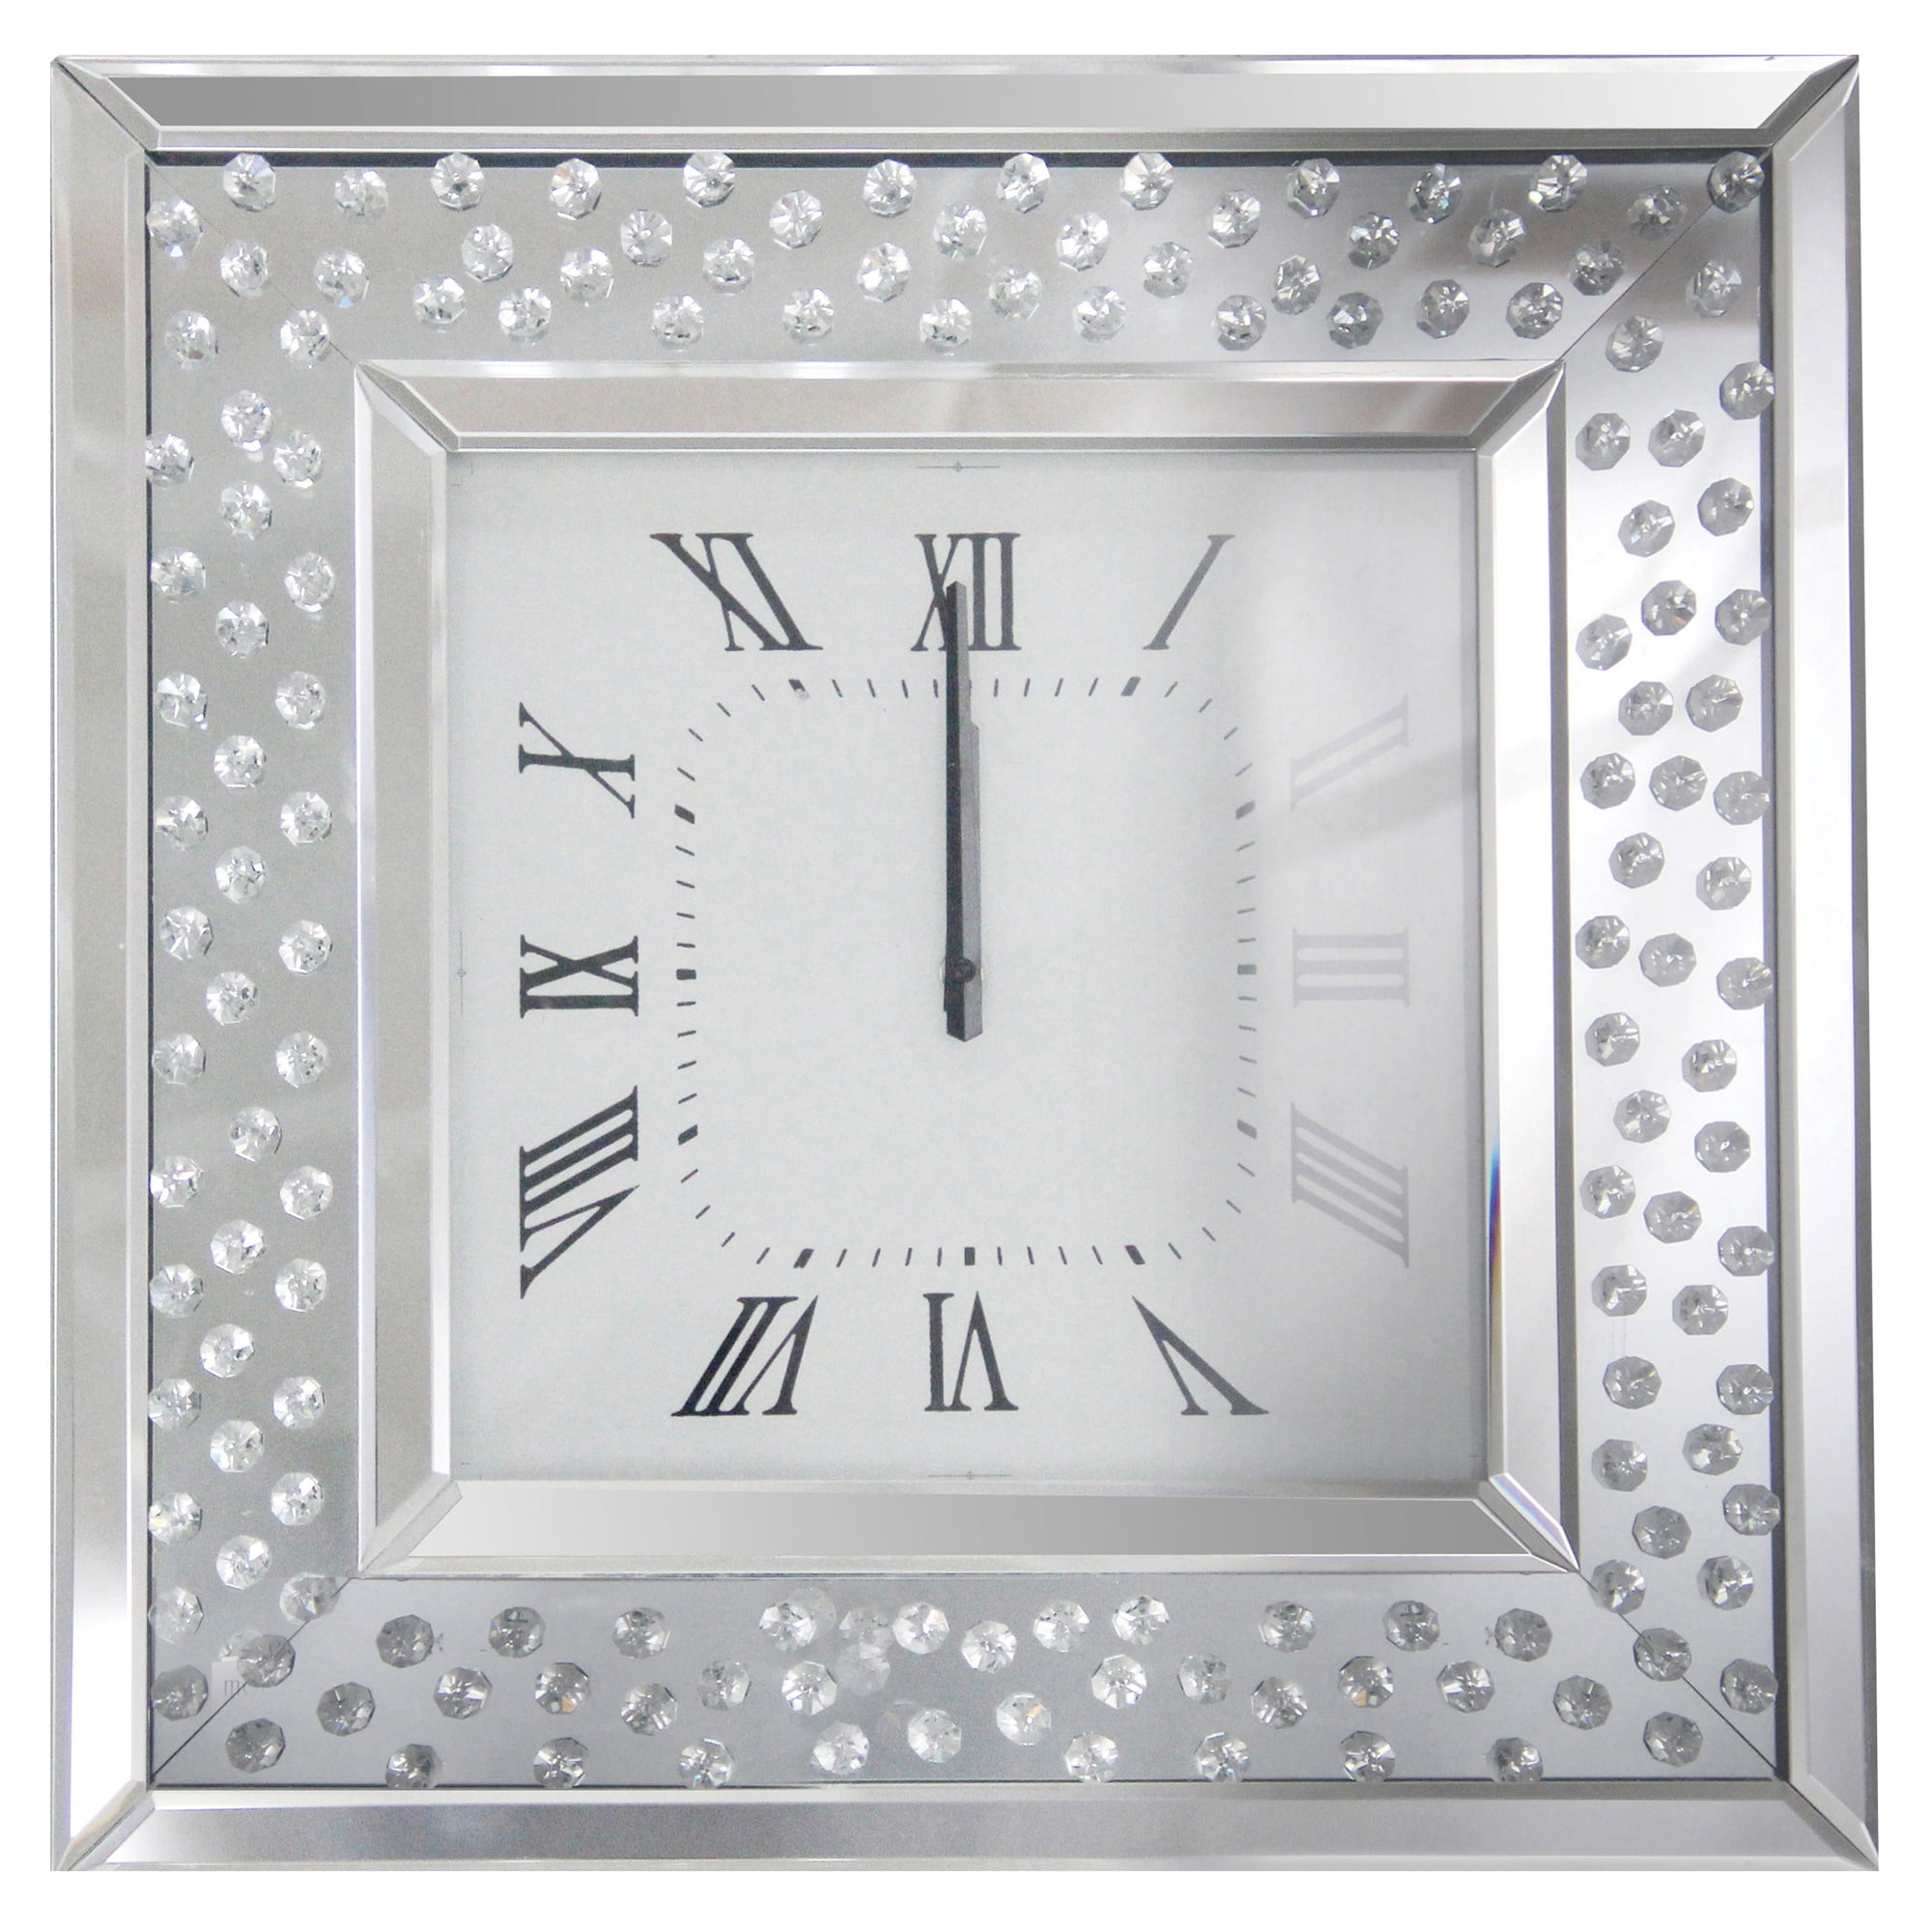 Wall Clock Mounted Home Decoration Faux Diamonds Mirrored Hanging Square Large 